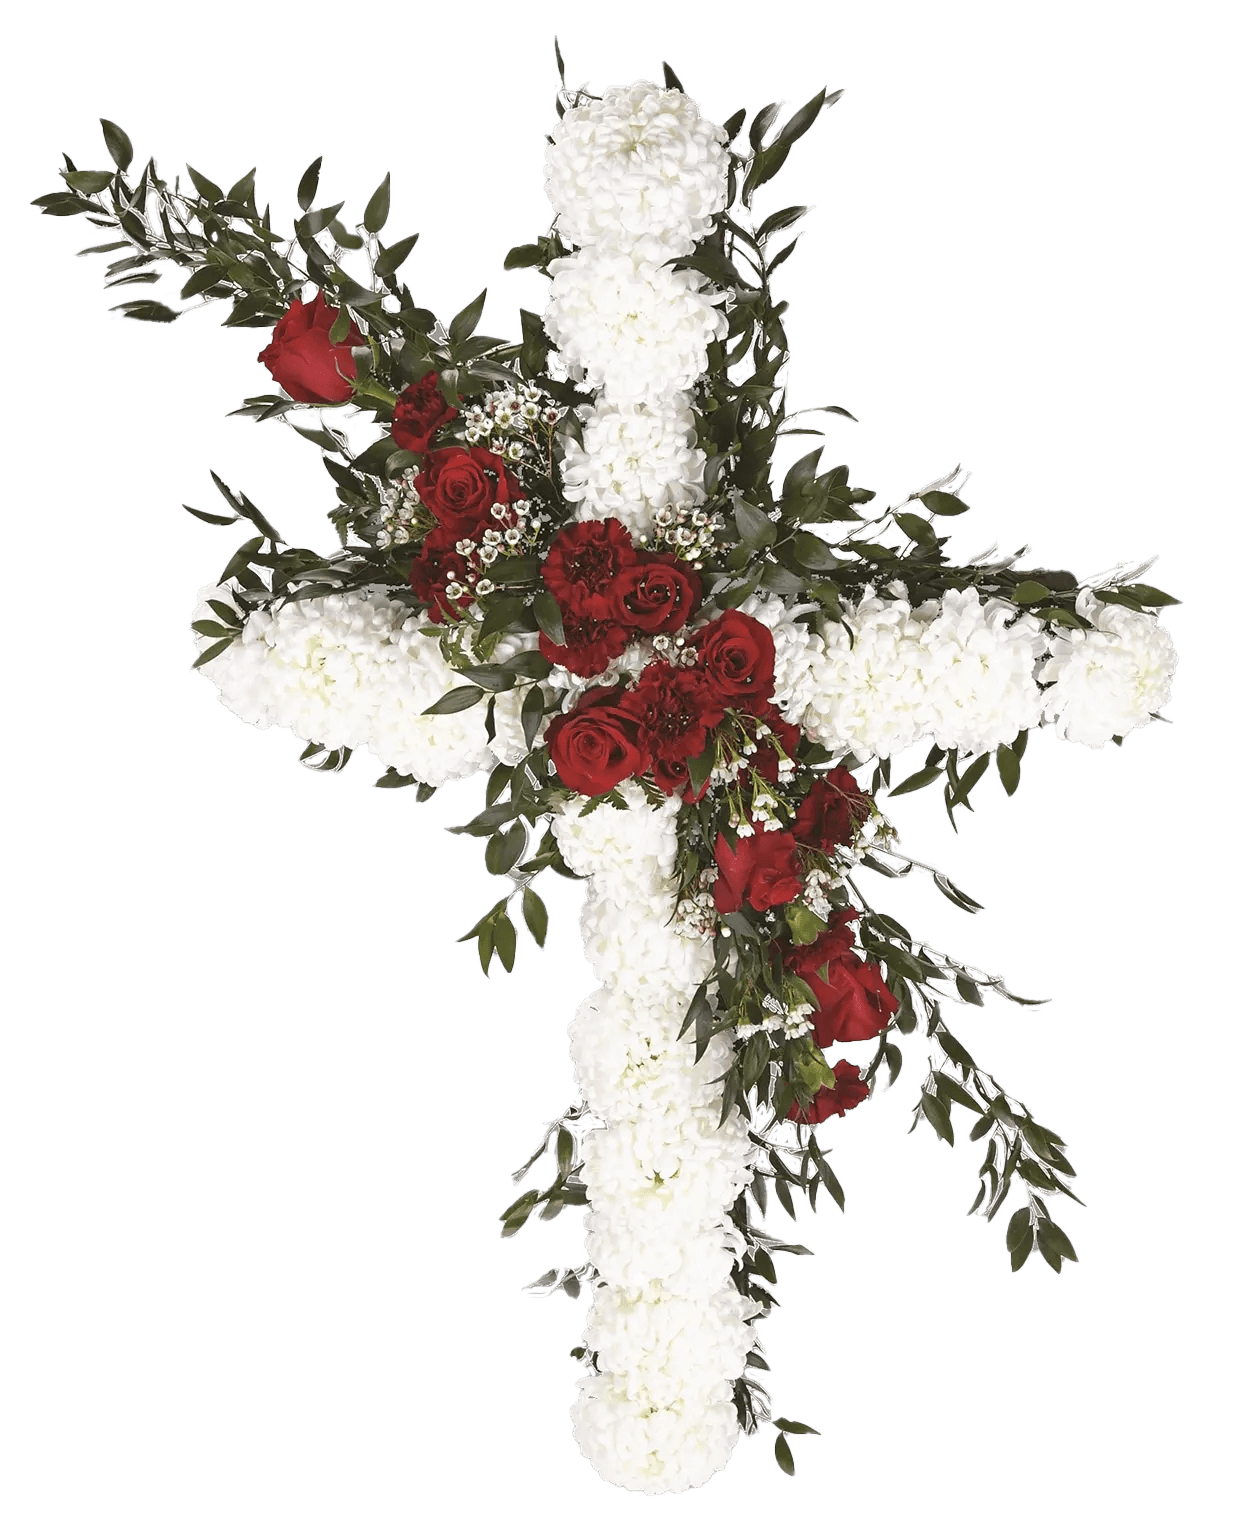 A sympathy cross made with white chrysanthemums and adorned with red roses and carnations and greens.